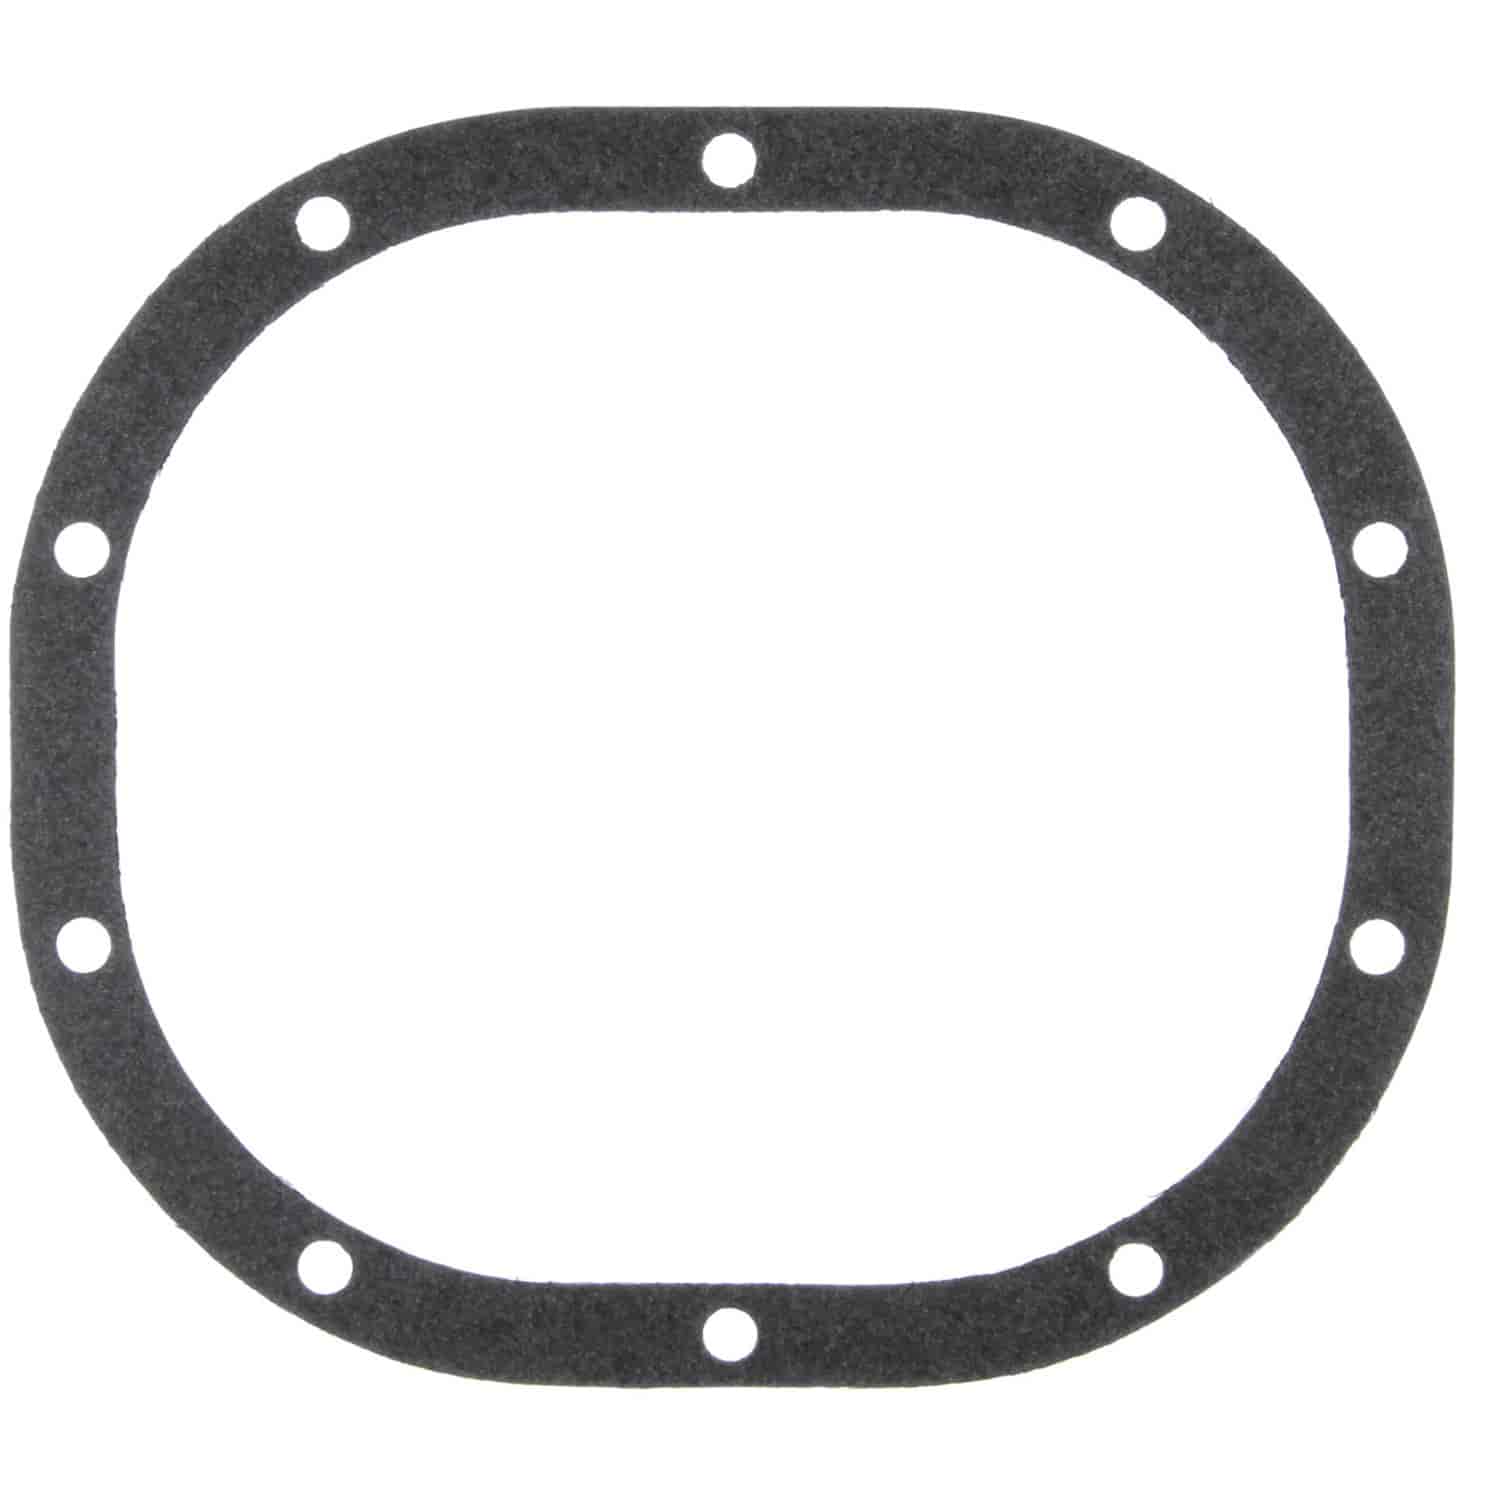 Differential Carrier Gasket Ford 8